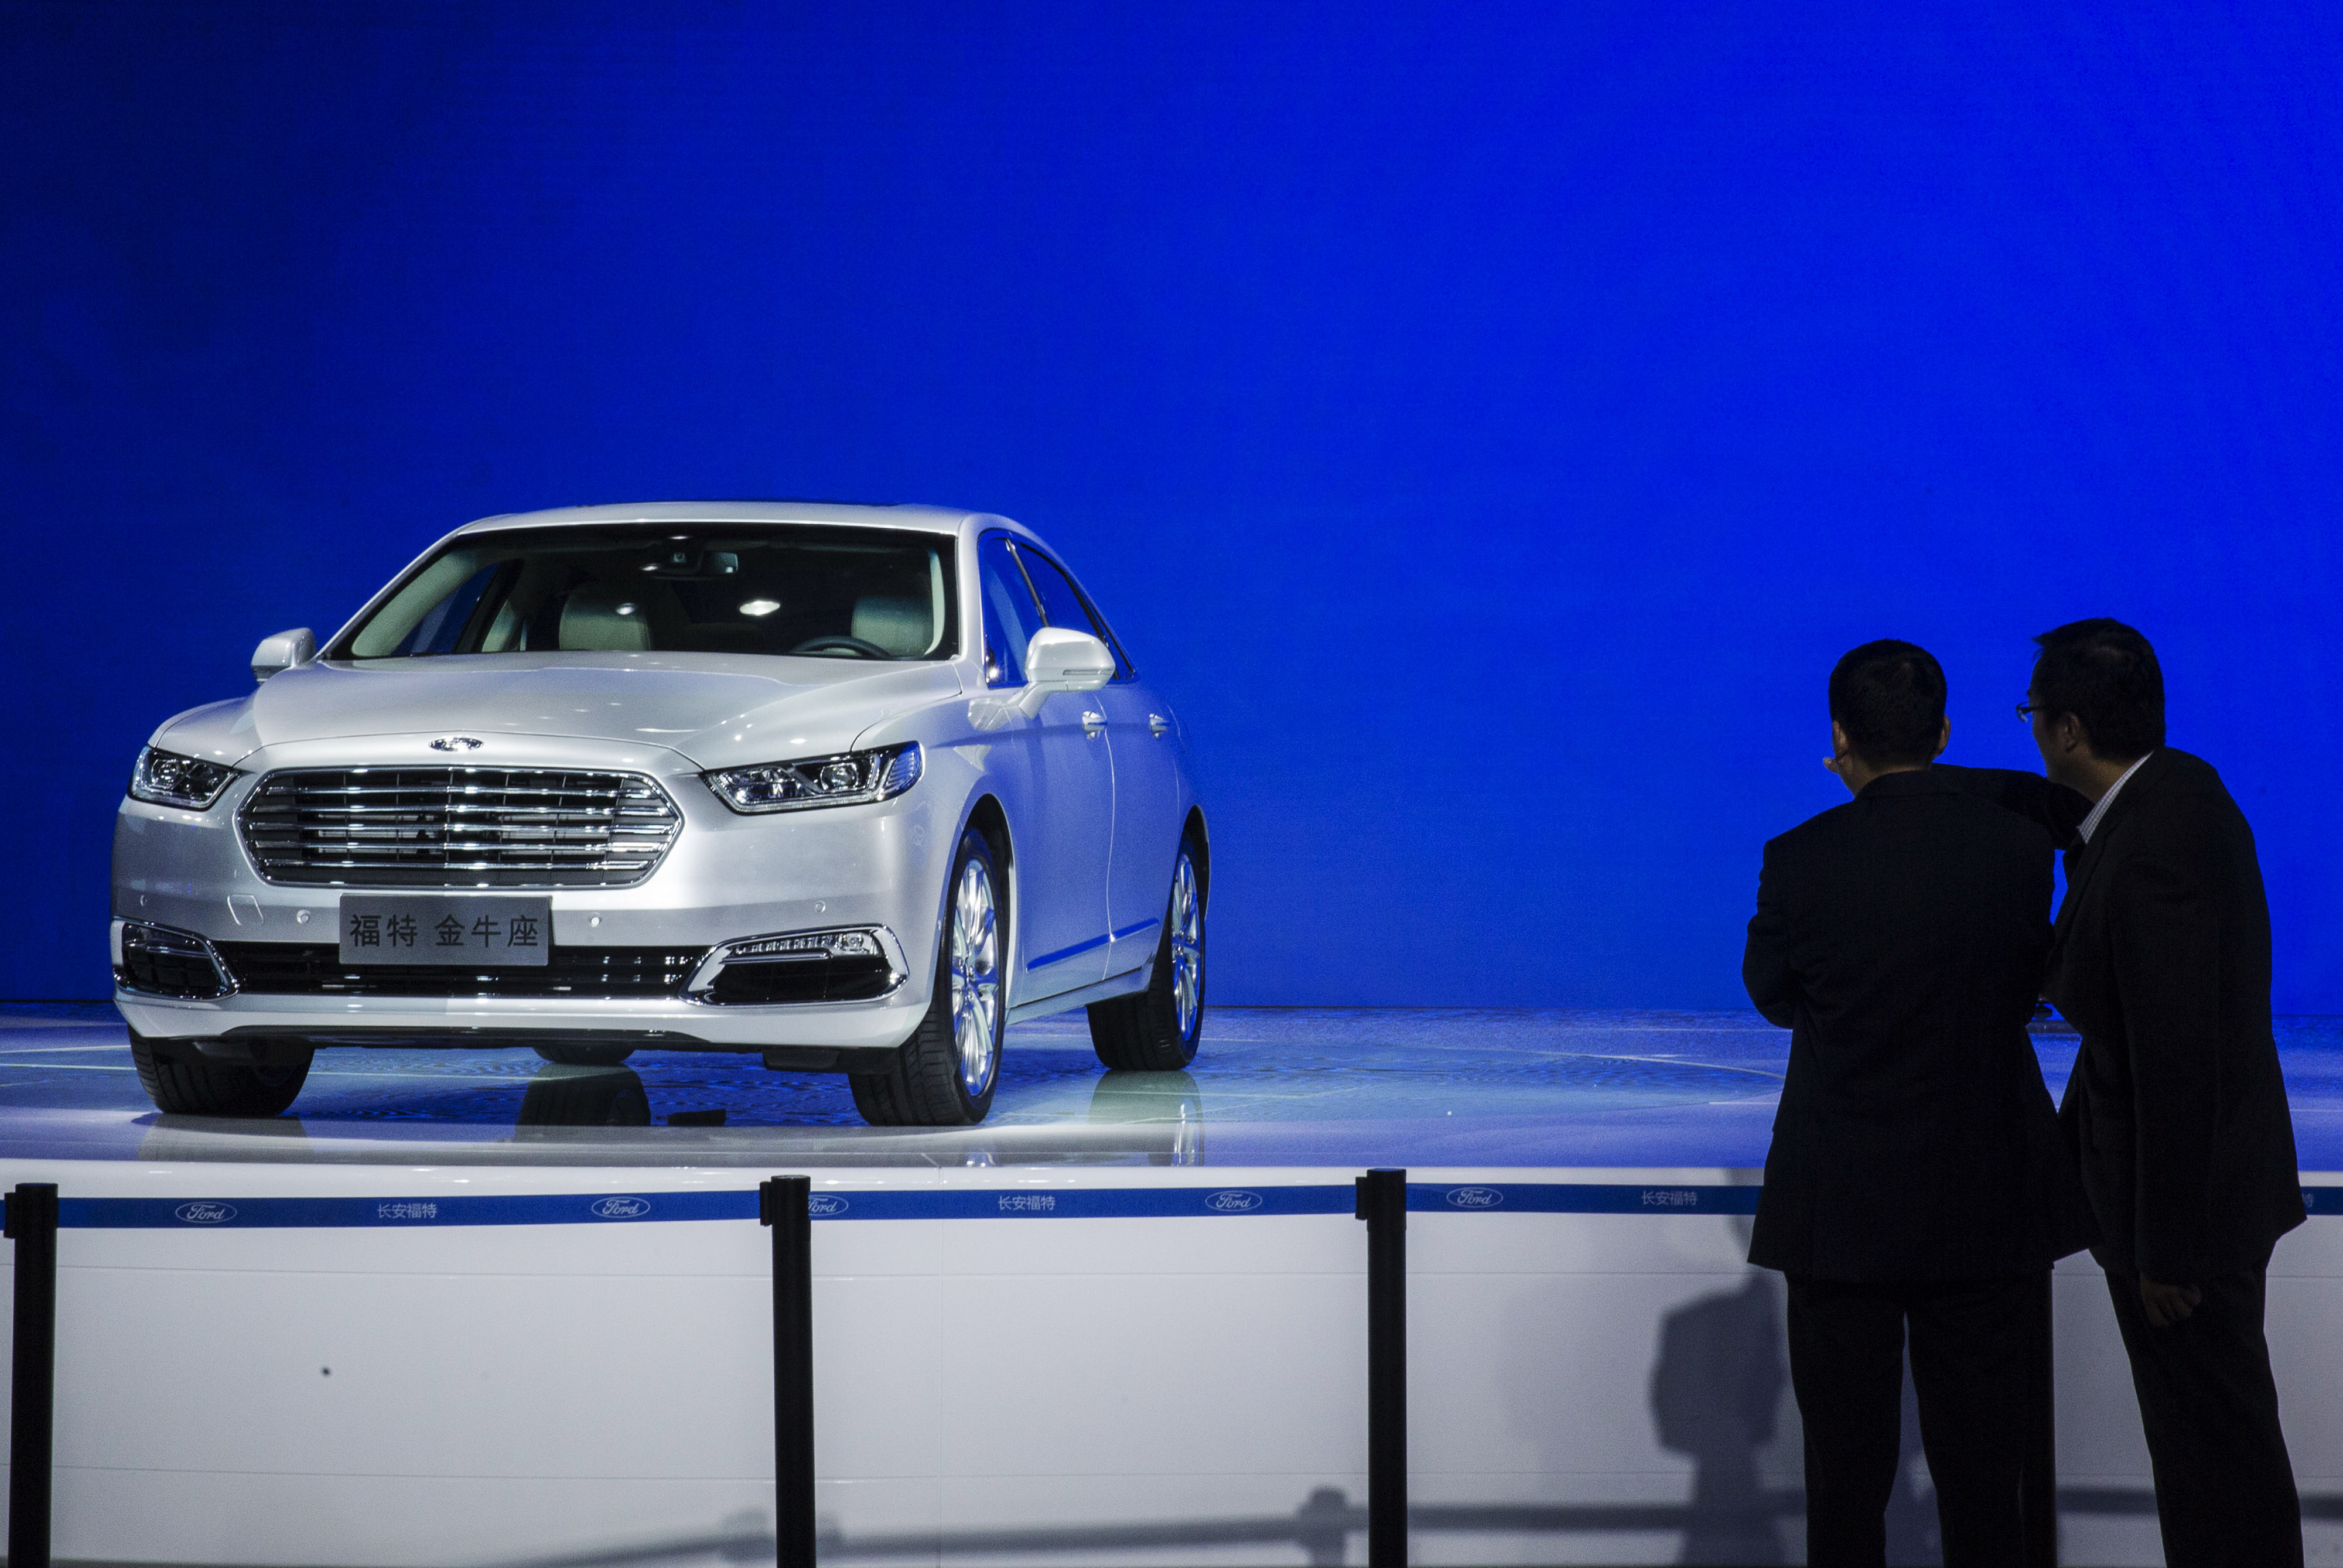 Attendees look at at a Ford Motor Co. Taurus sedan on display during the China (Guangzhou) International Automobile Exhibition in Guangzhou, China, on Friday, Nov. 20, 2015. (Bloomberg—Bloomberg via Getty Images)